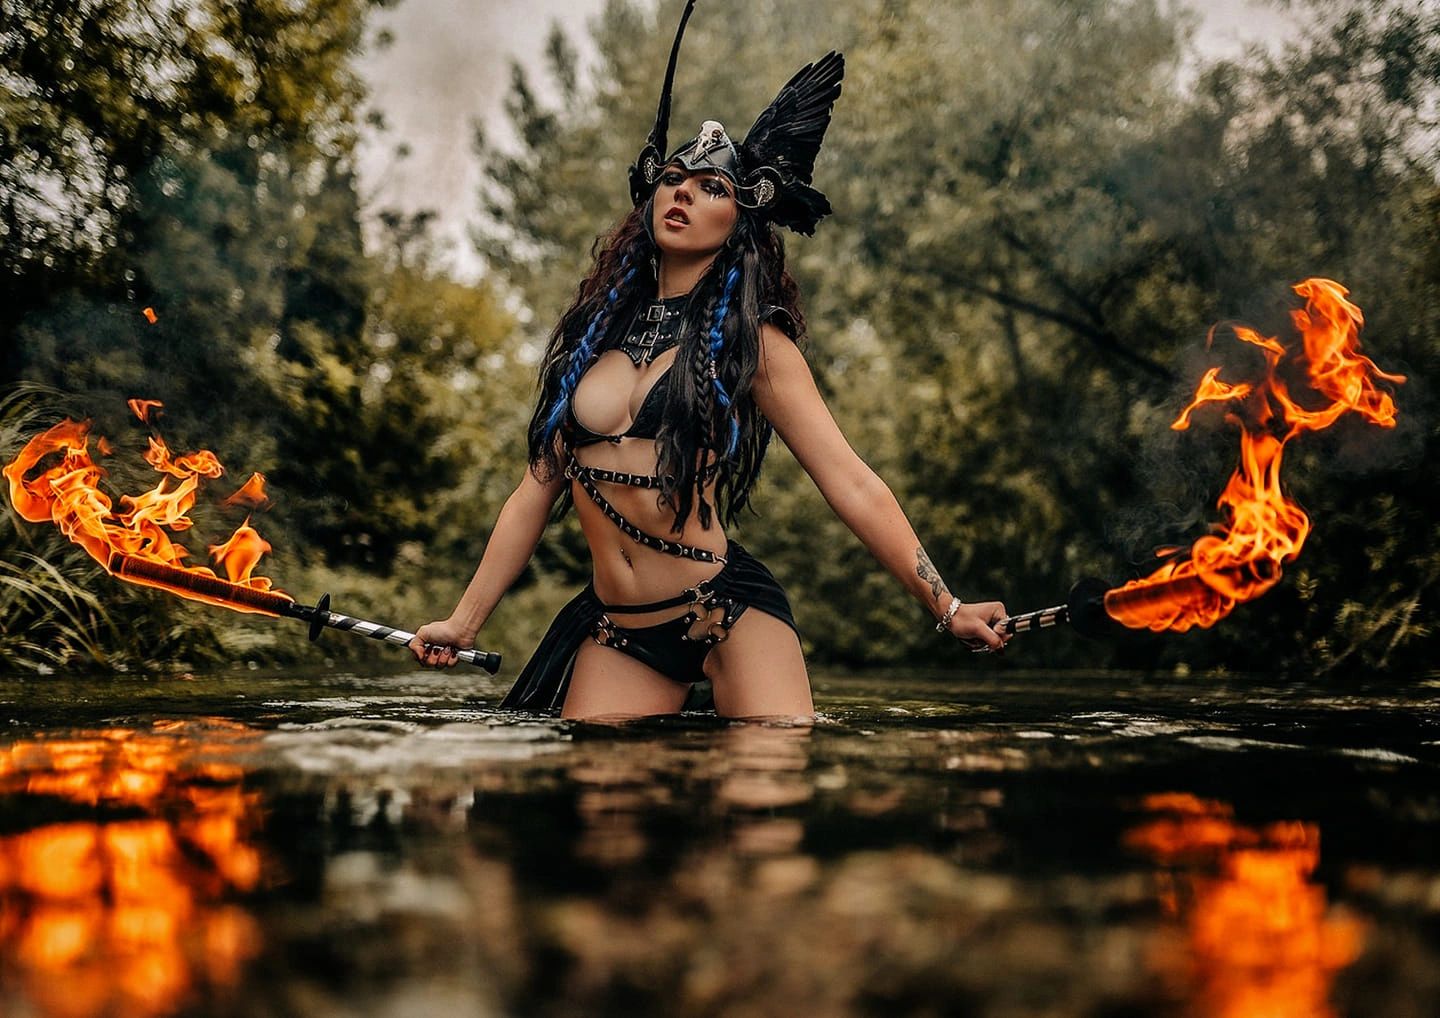 Chloe Elizabxth as a shield maiden with fire swords in a river  